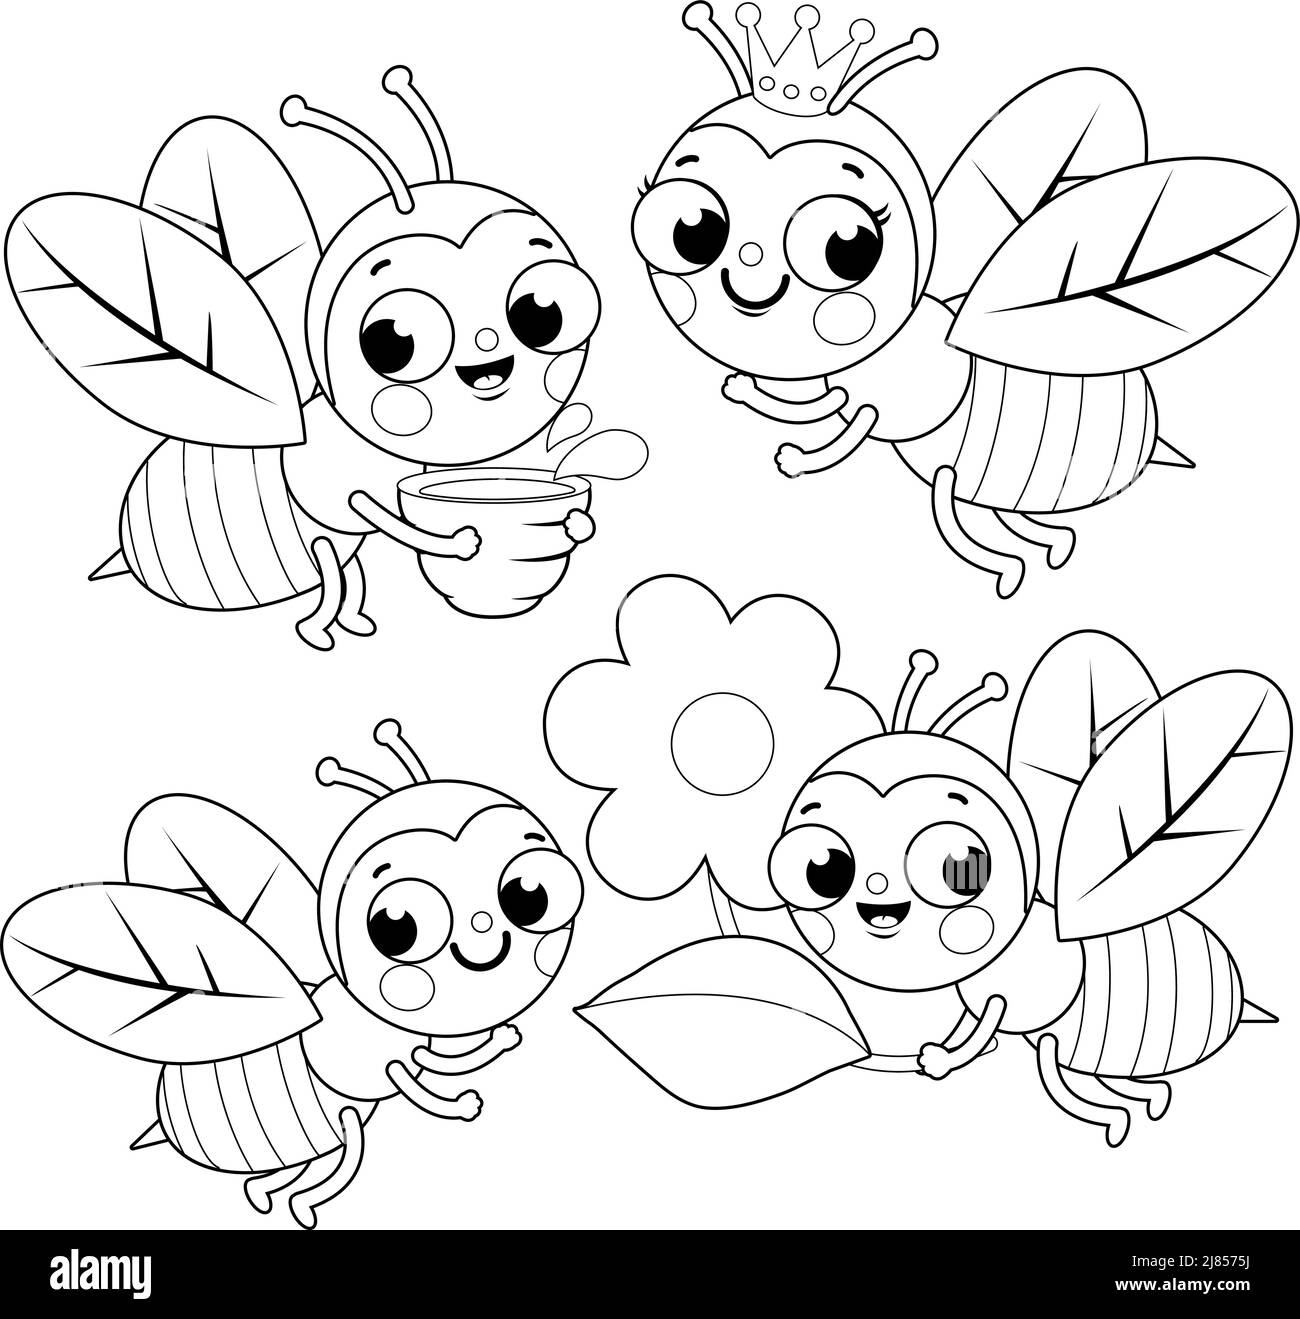 Cute bees vector black and white coloring page stock vector image art